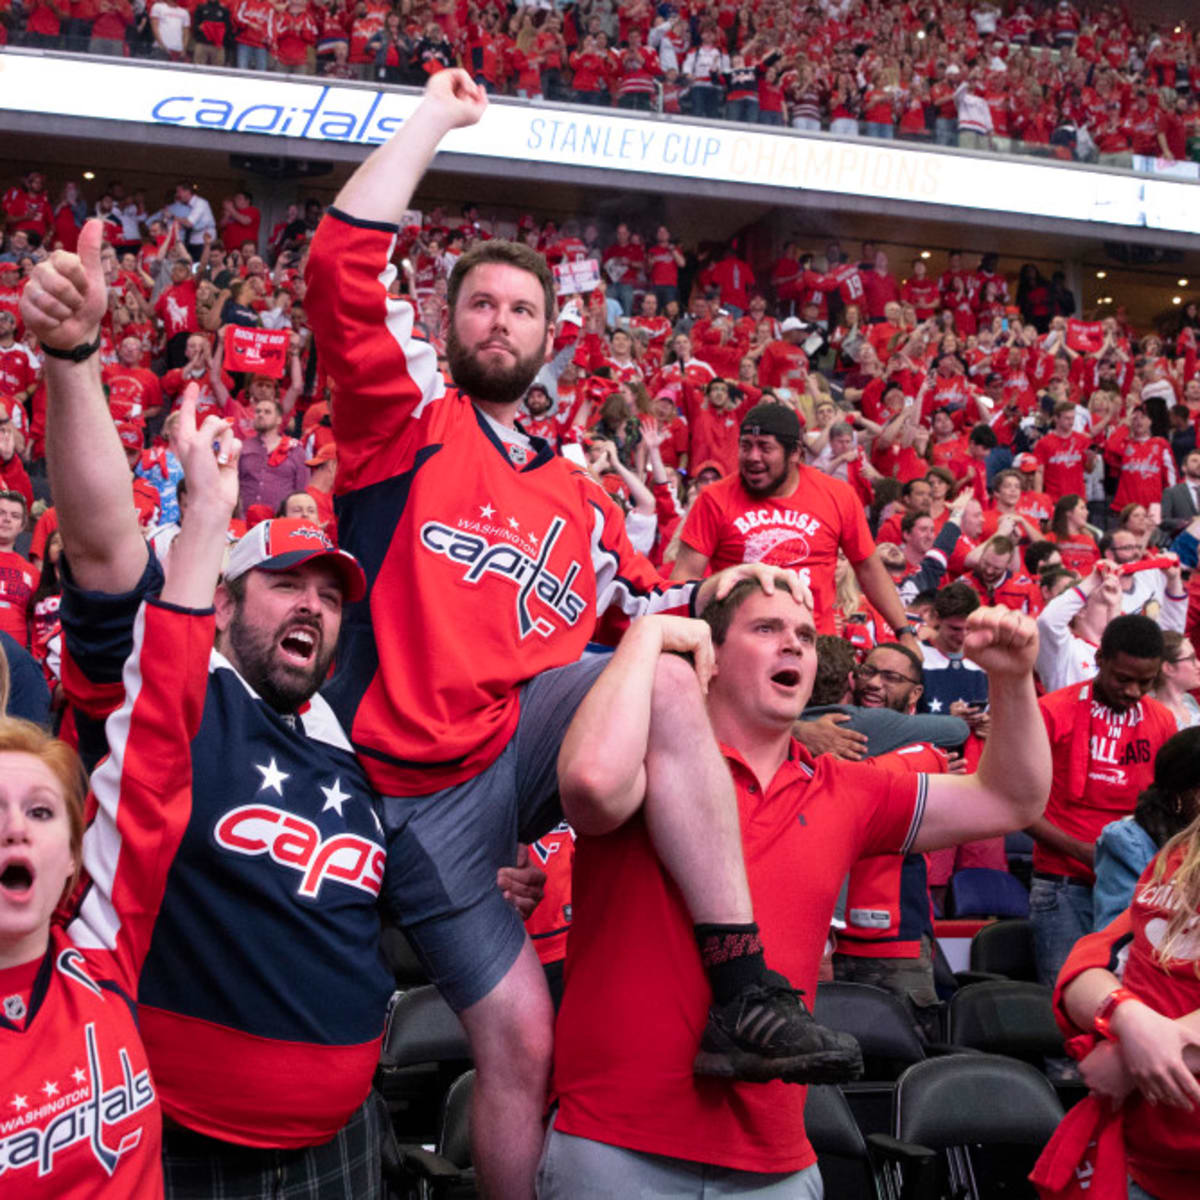 Celebrate the Washington Capitals' Stanley Cup Victory with this